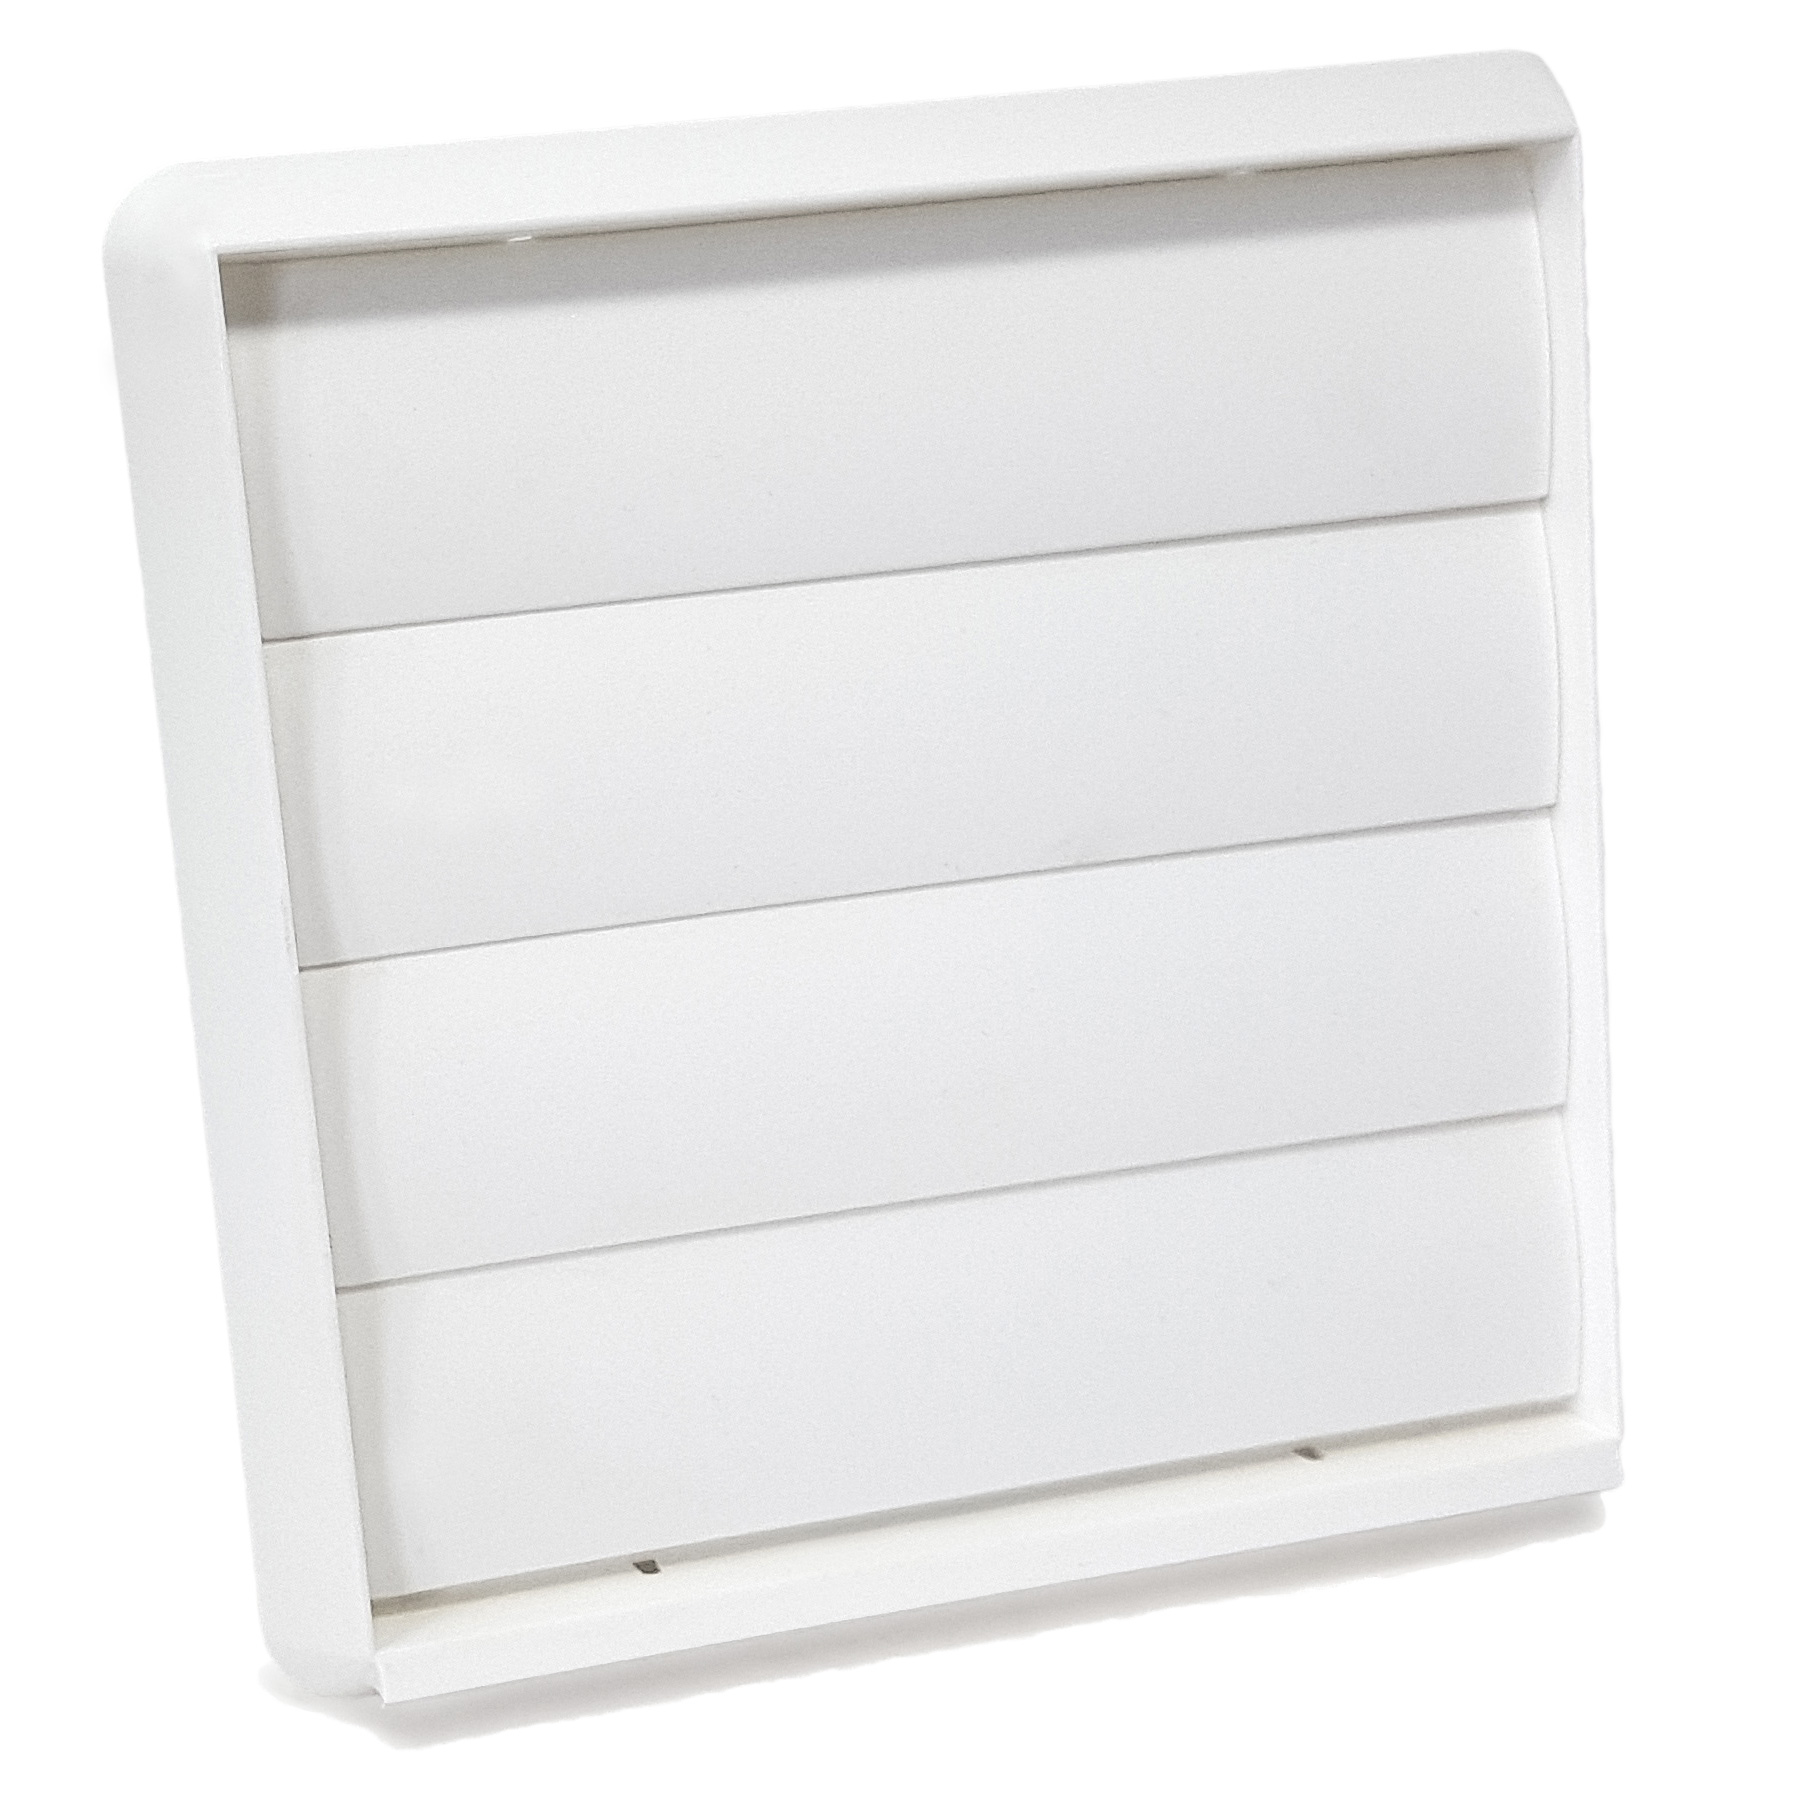 Kair Gravity Grille 150mm - 6 inch White External Ducting Air Vent with Round Spigot and Not-Return Shutters